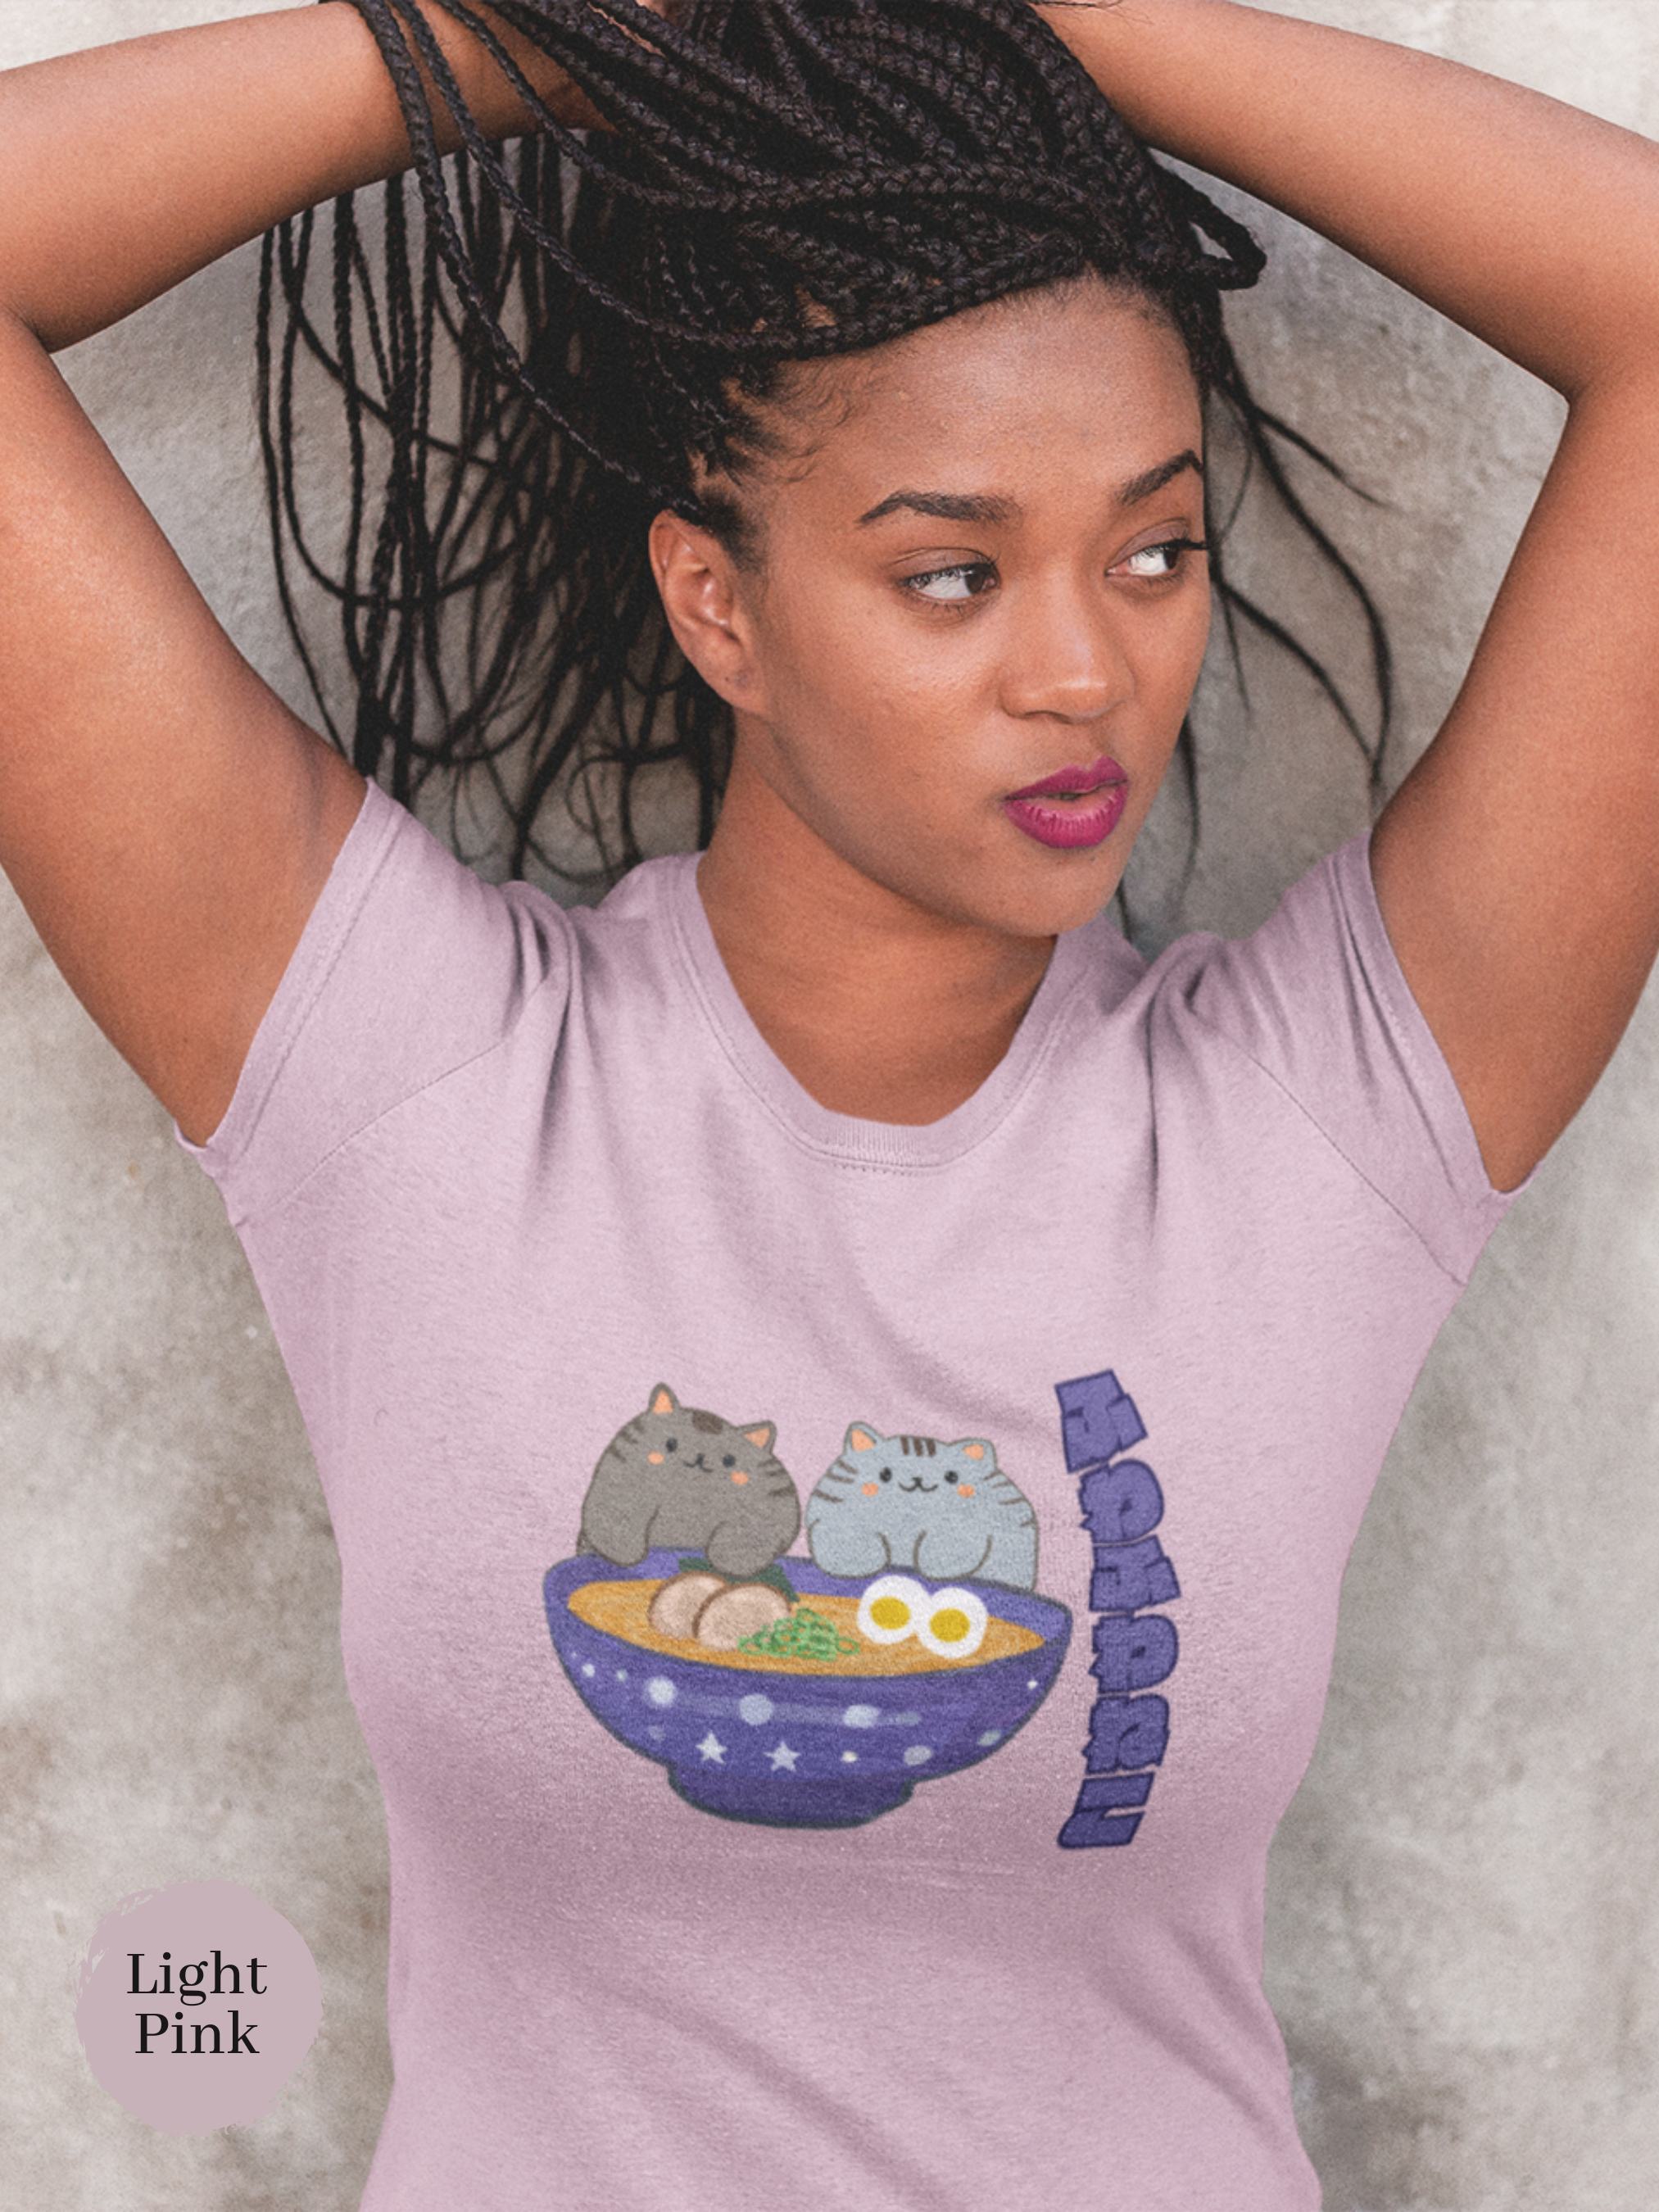 Ramen T-Shirt: Fluffy Cat Duo on a Delicious Bowl of Noodles - Japanese Foodie Shirt with Cute Ramen Art